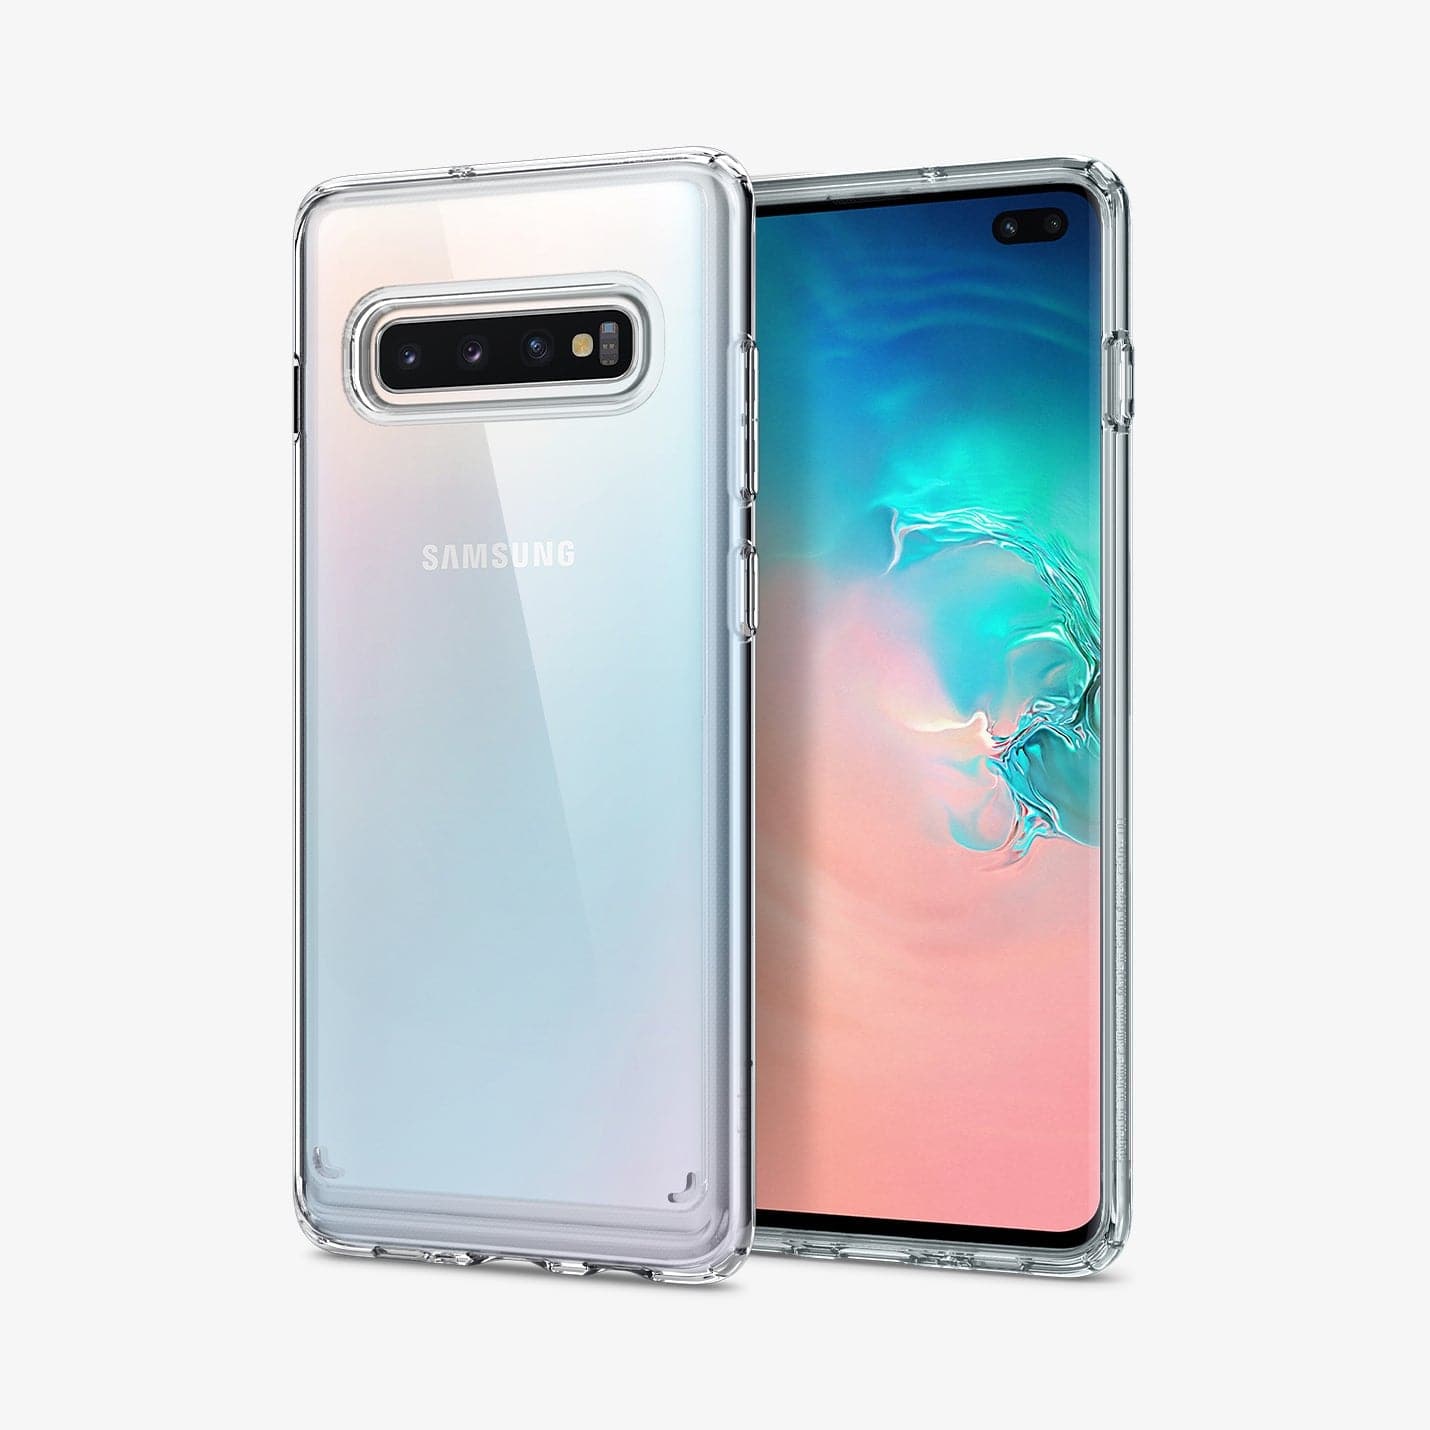 606CS25766 - Galaxy S10 Plus Ultra Hybrid Case in crystal clear showing the back and front